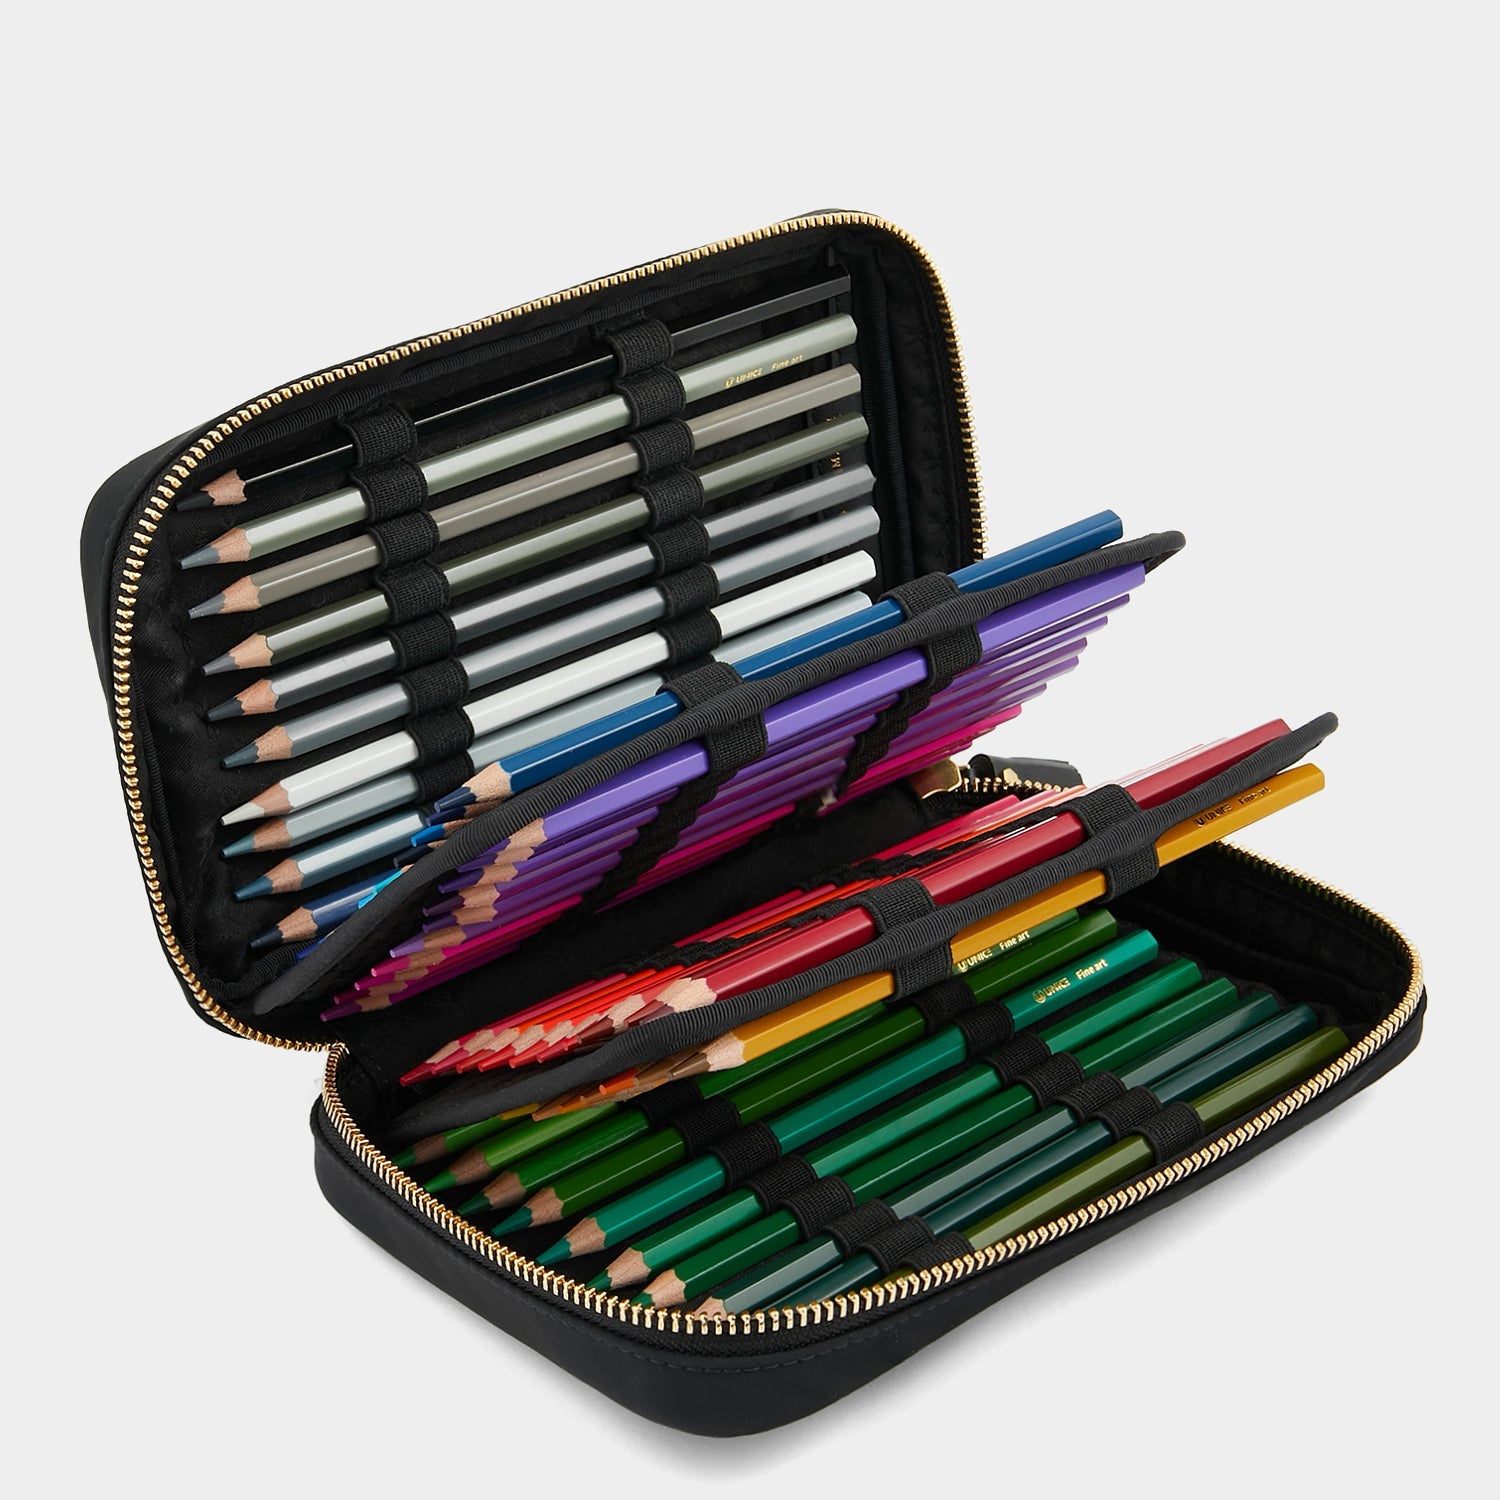 Large Pencil Case With Pencils